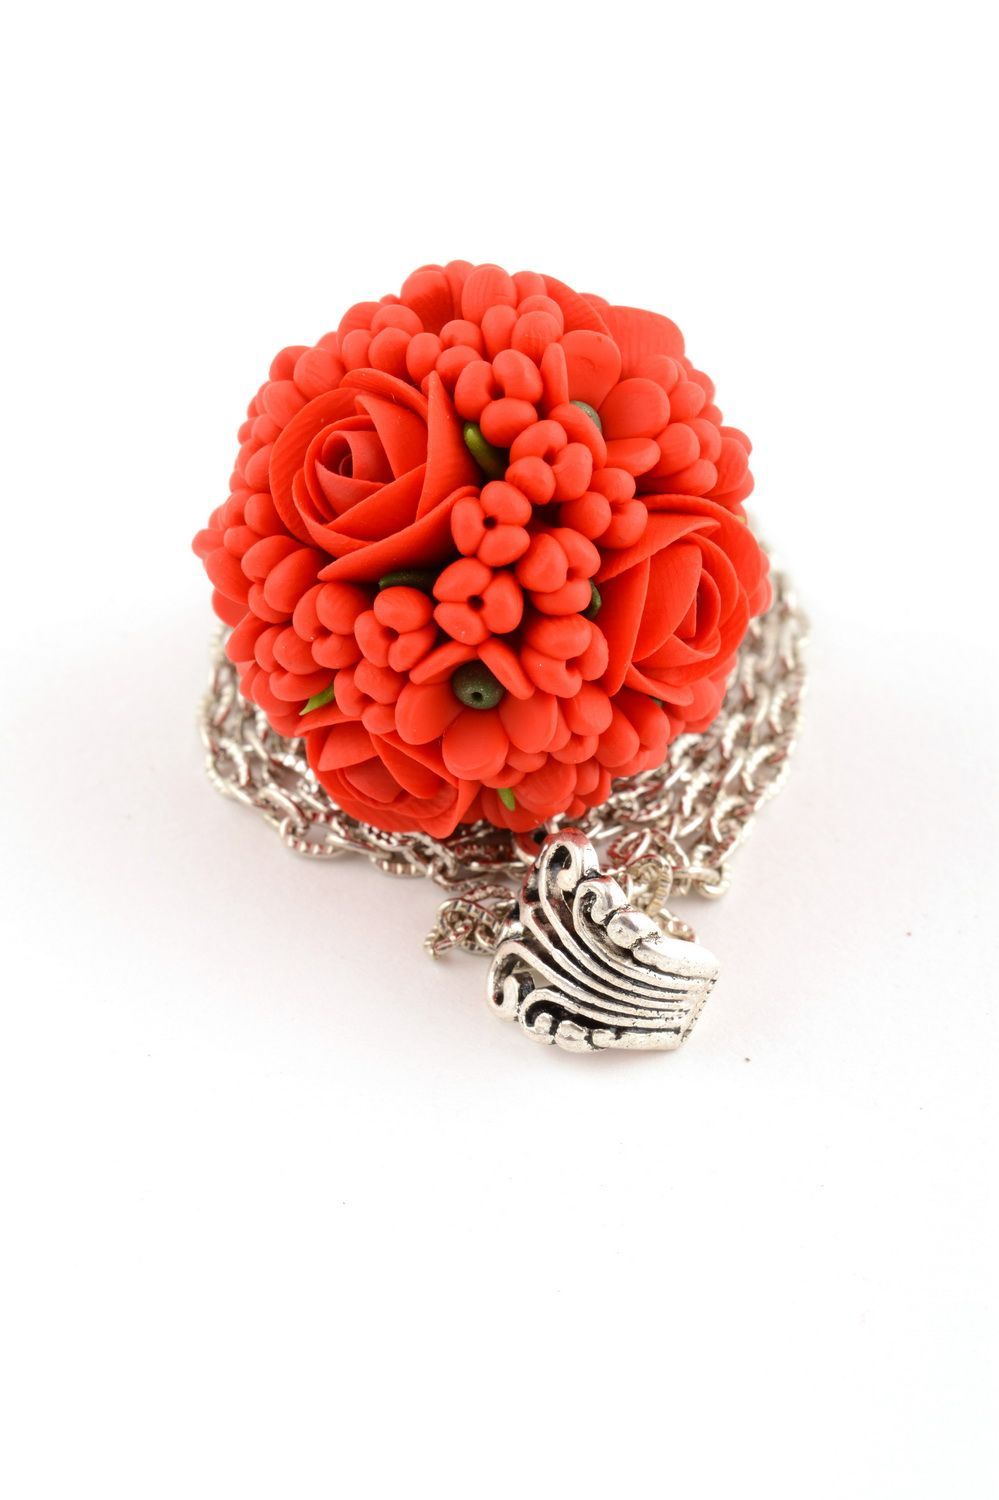 Handmade pendant made of polymer clay on chain in shape of bouquet of red roses photo 4